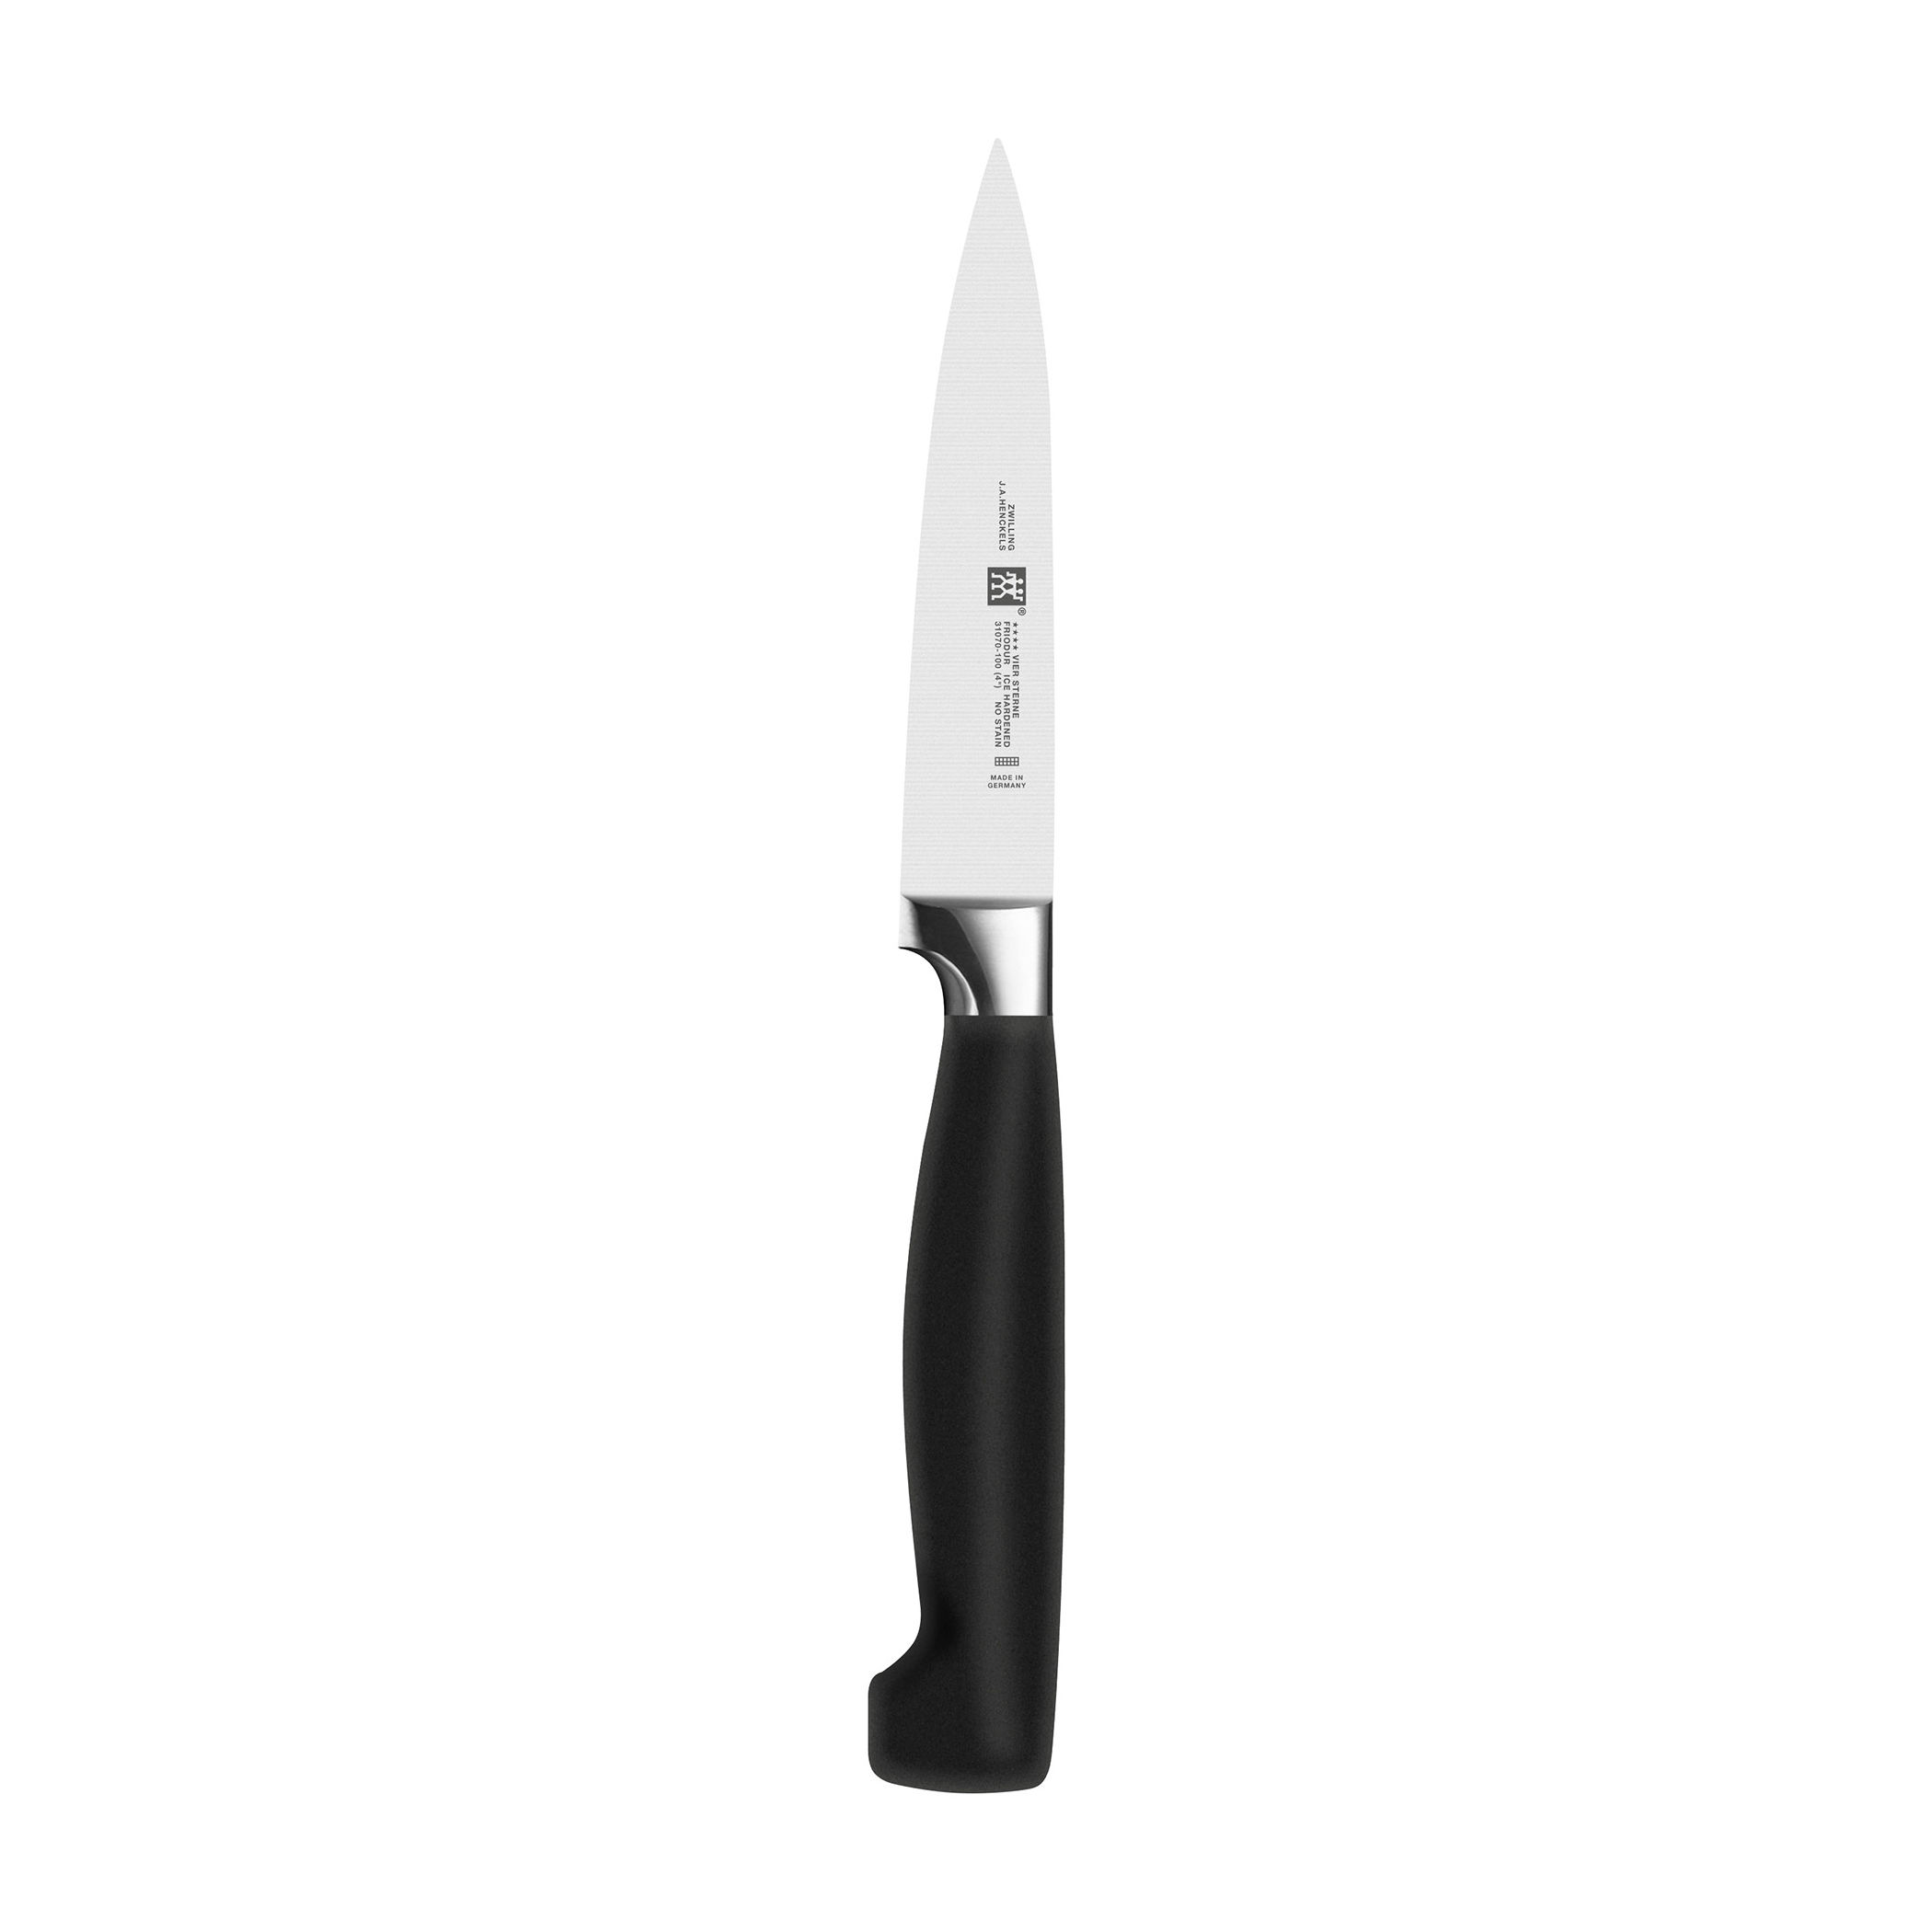 ZWILLING J.A. Henckels Four Star 4-inch Paring Knife – The Cook's Nook  Website